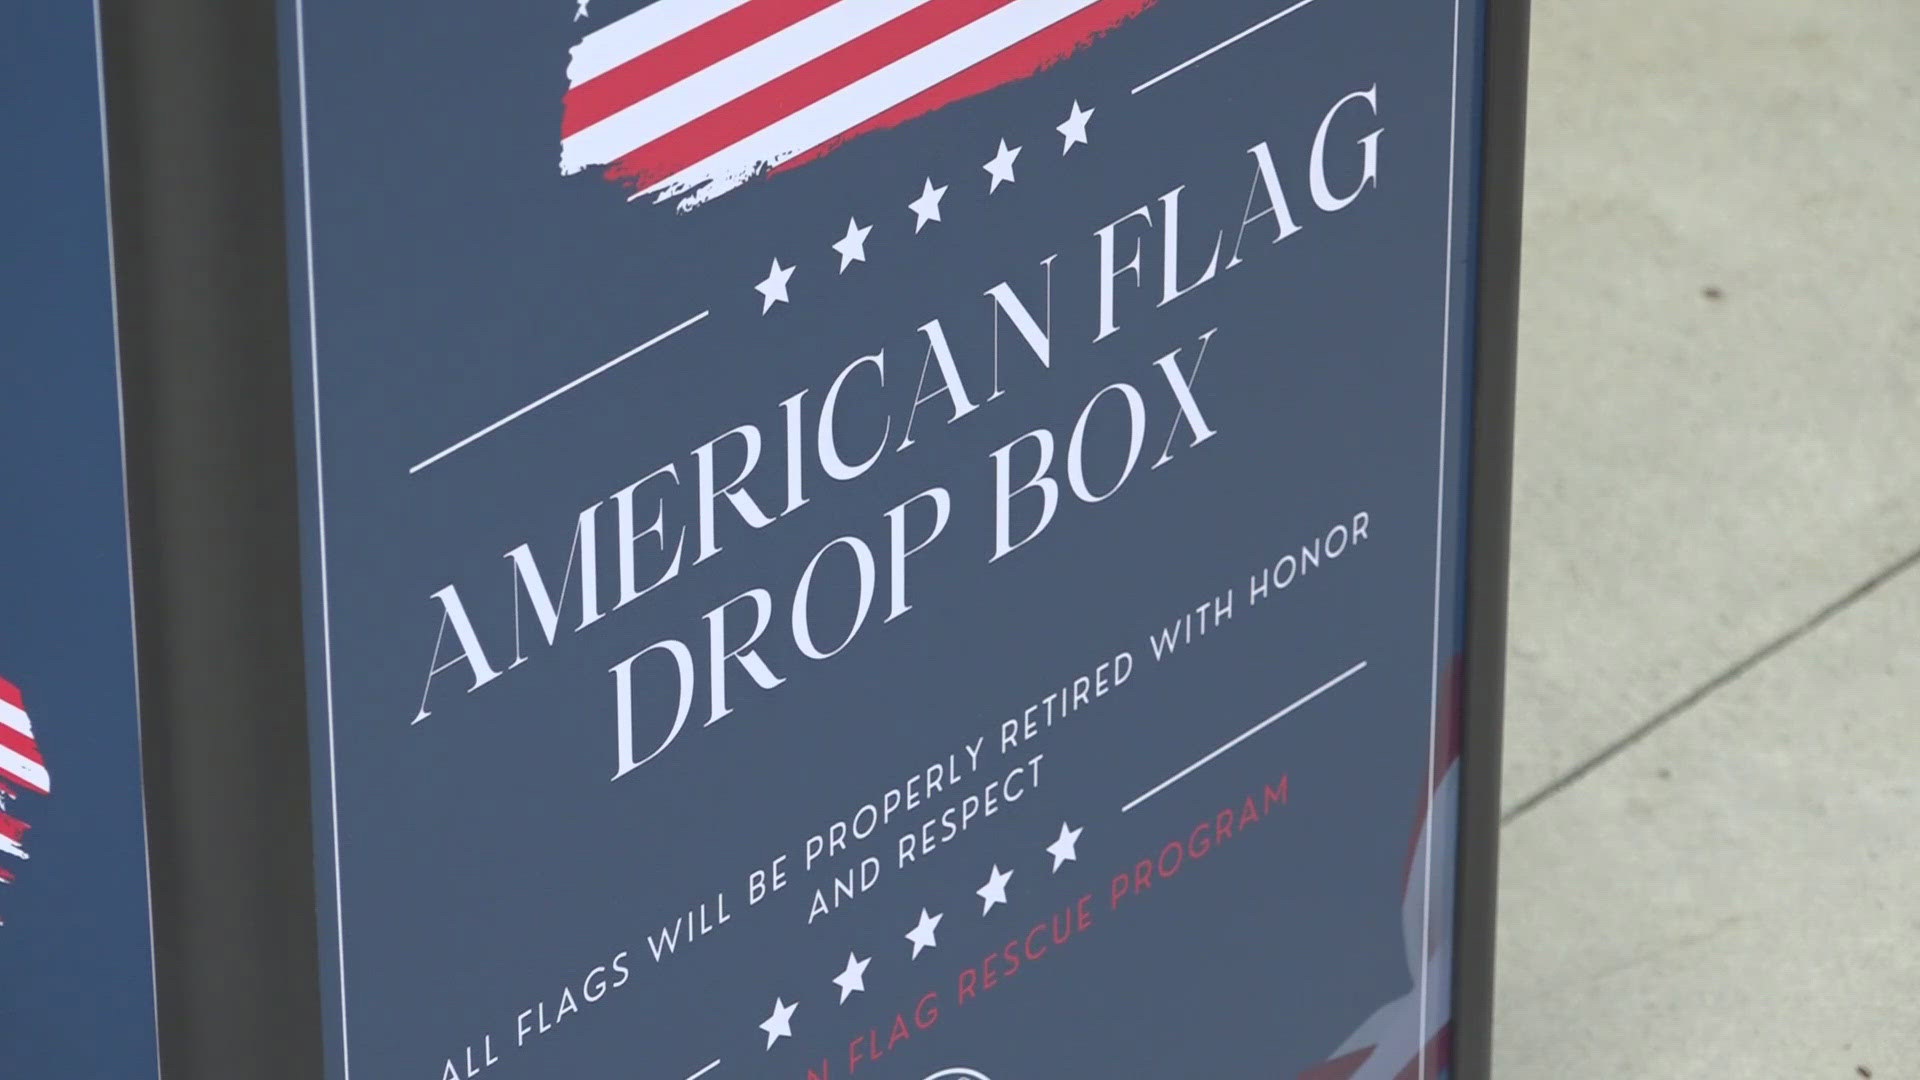 The American Flag Rescue Mission has retired nearly 12,000 flags in five years, saving them from winding up in landfills.